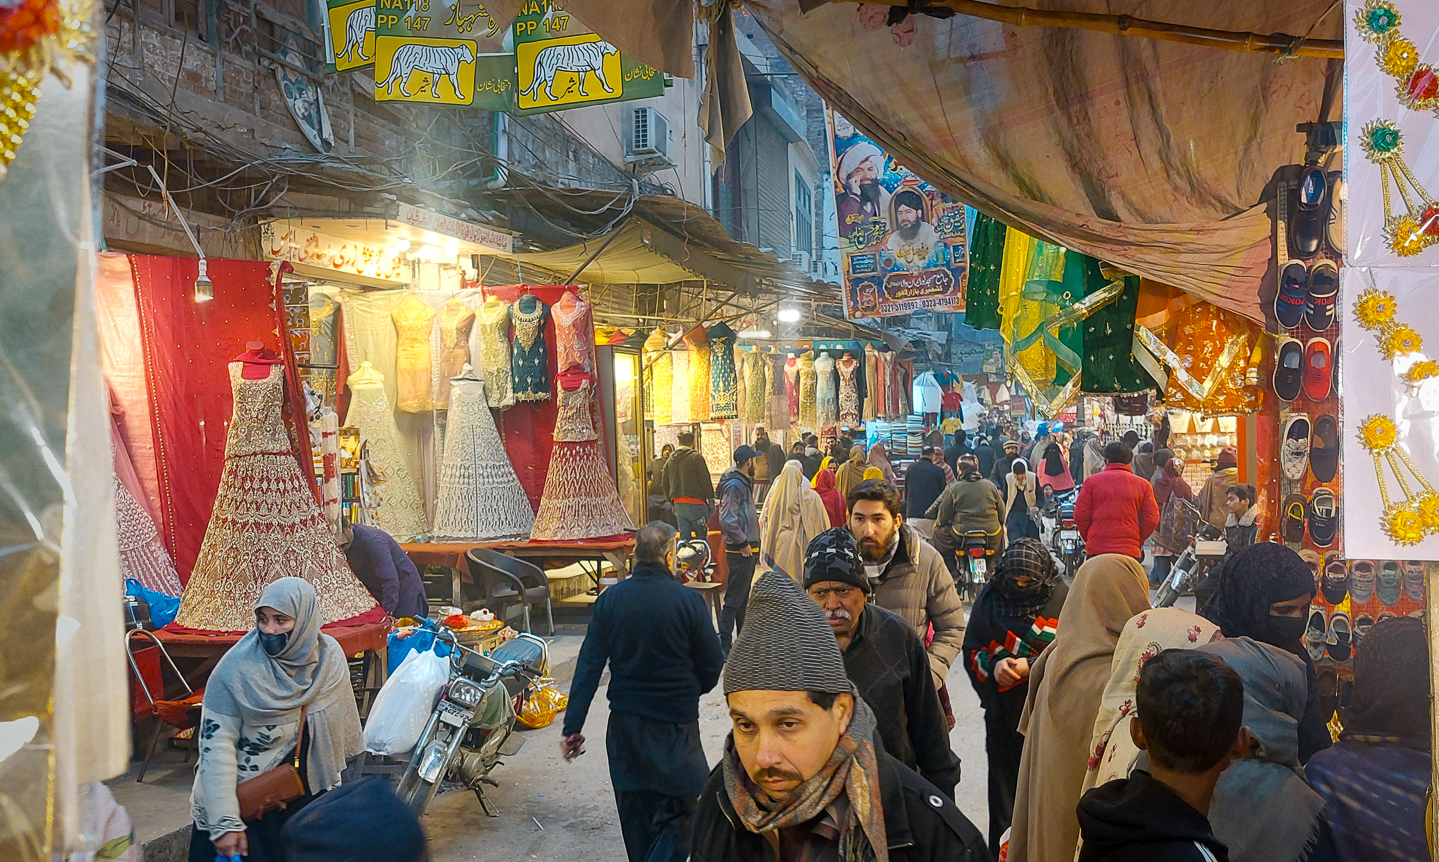 <span  class="uc_style_uc_tiles_grid_image_elementor_uc_items_attribute_title" style="color:#ffffff;">street bazzar in Lahore (very alive!)</span>